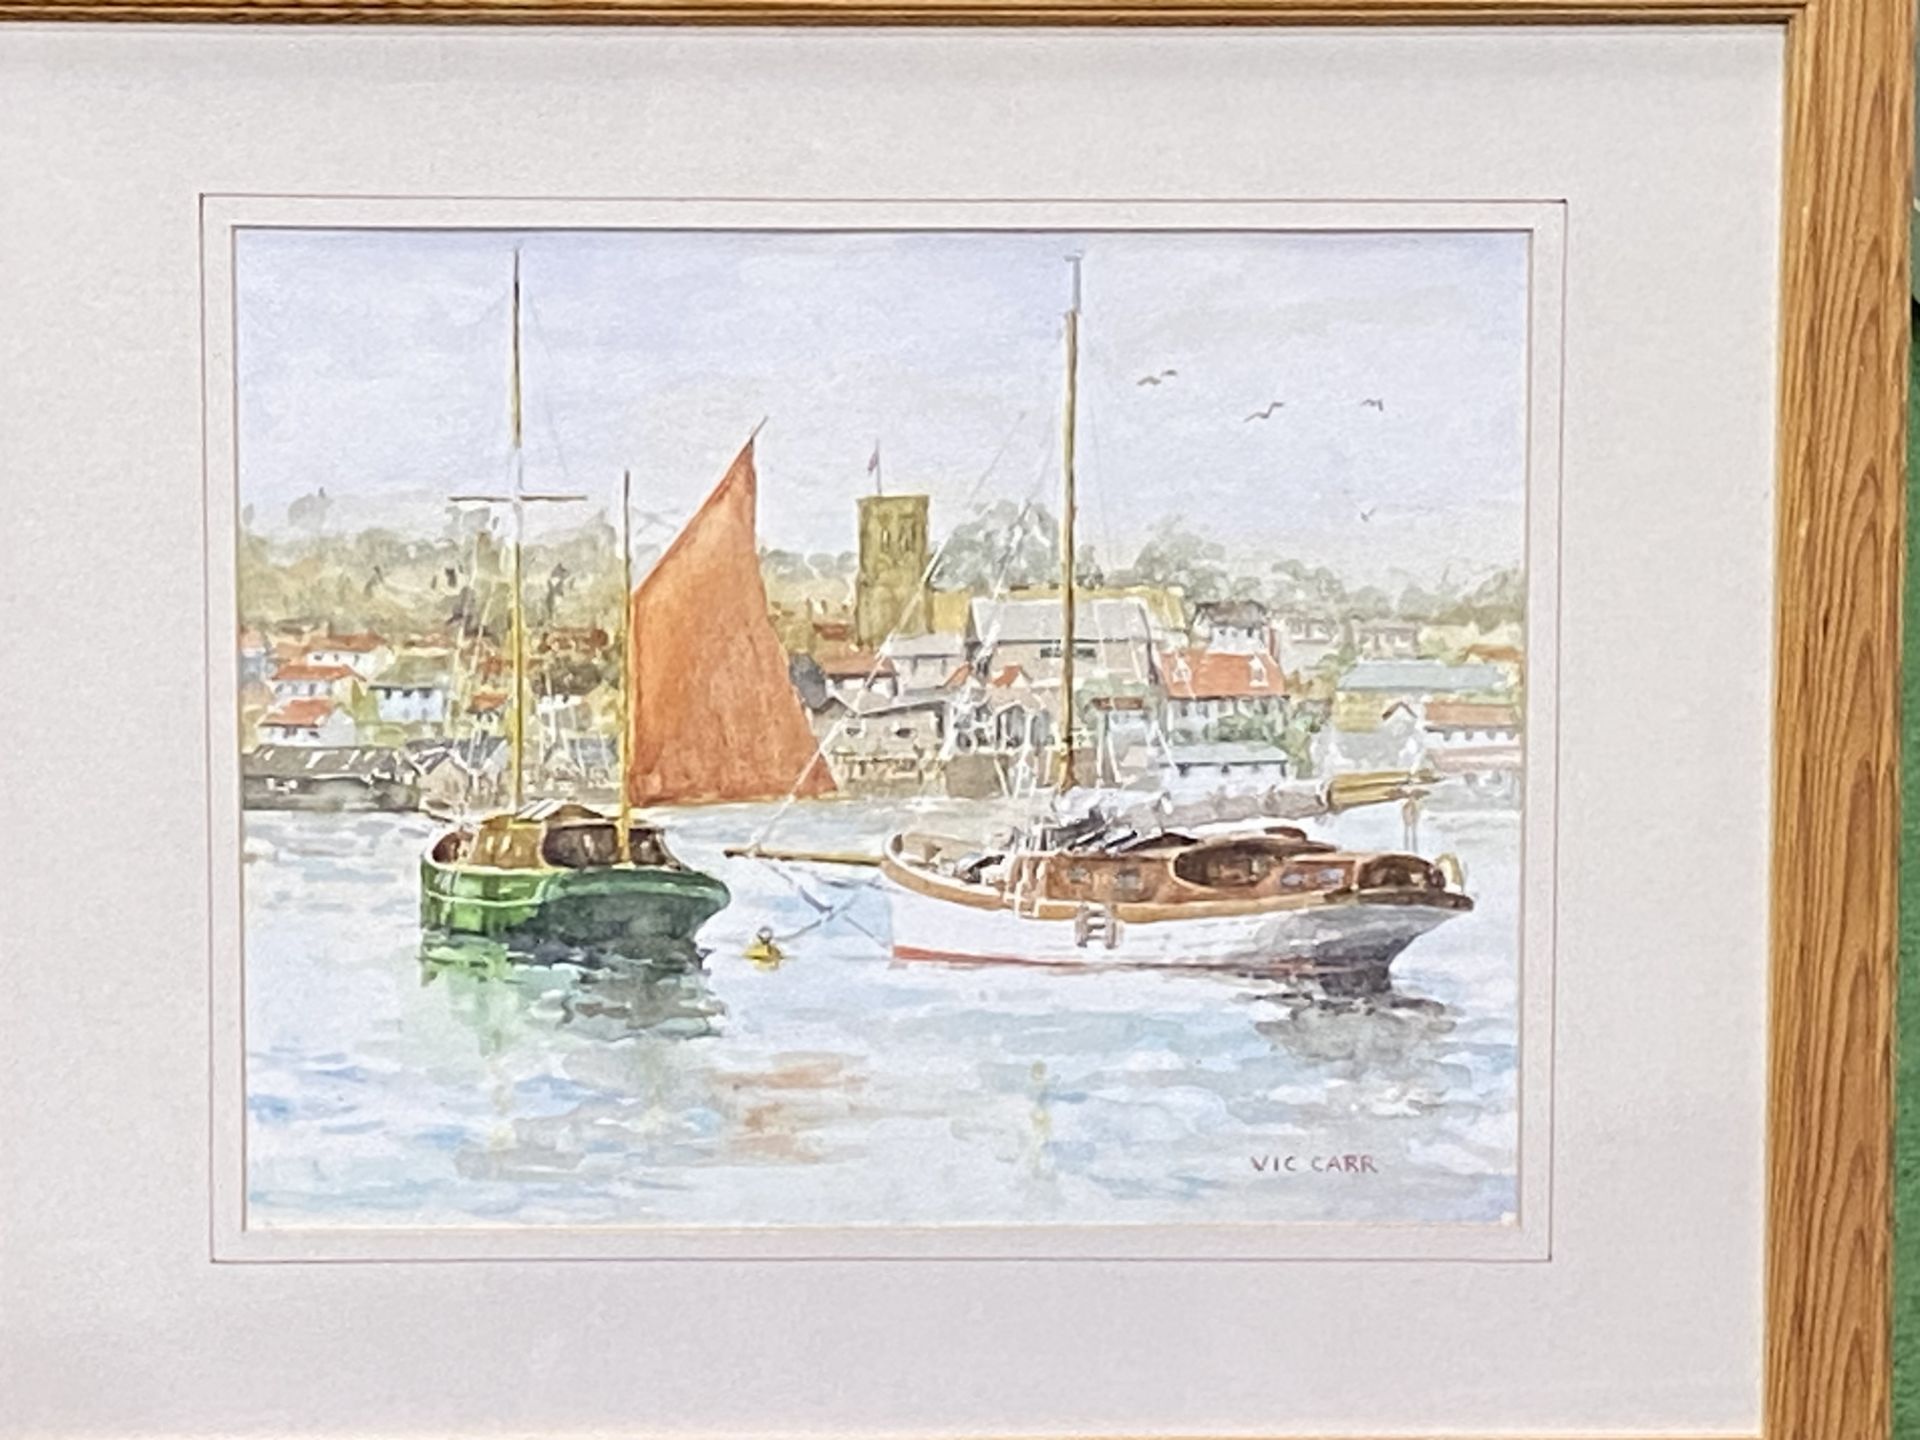 Framed and glazed watercolour, signed Vic Carr - Image 4 of 4